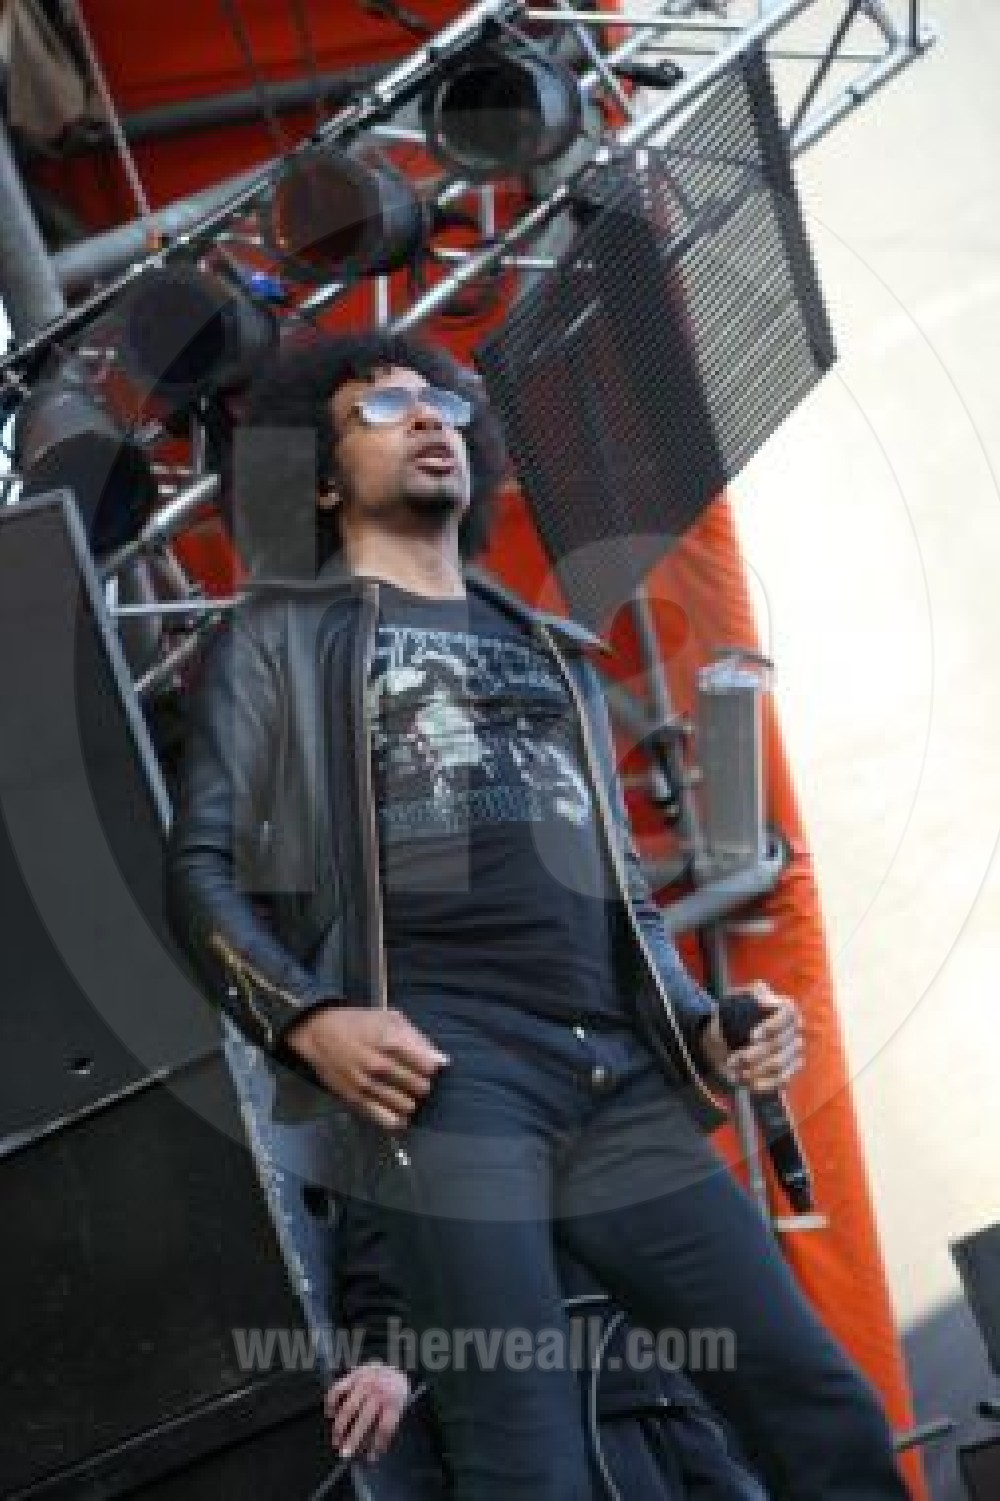 William DuVall on stage